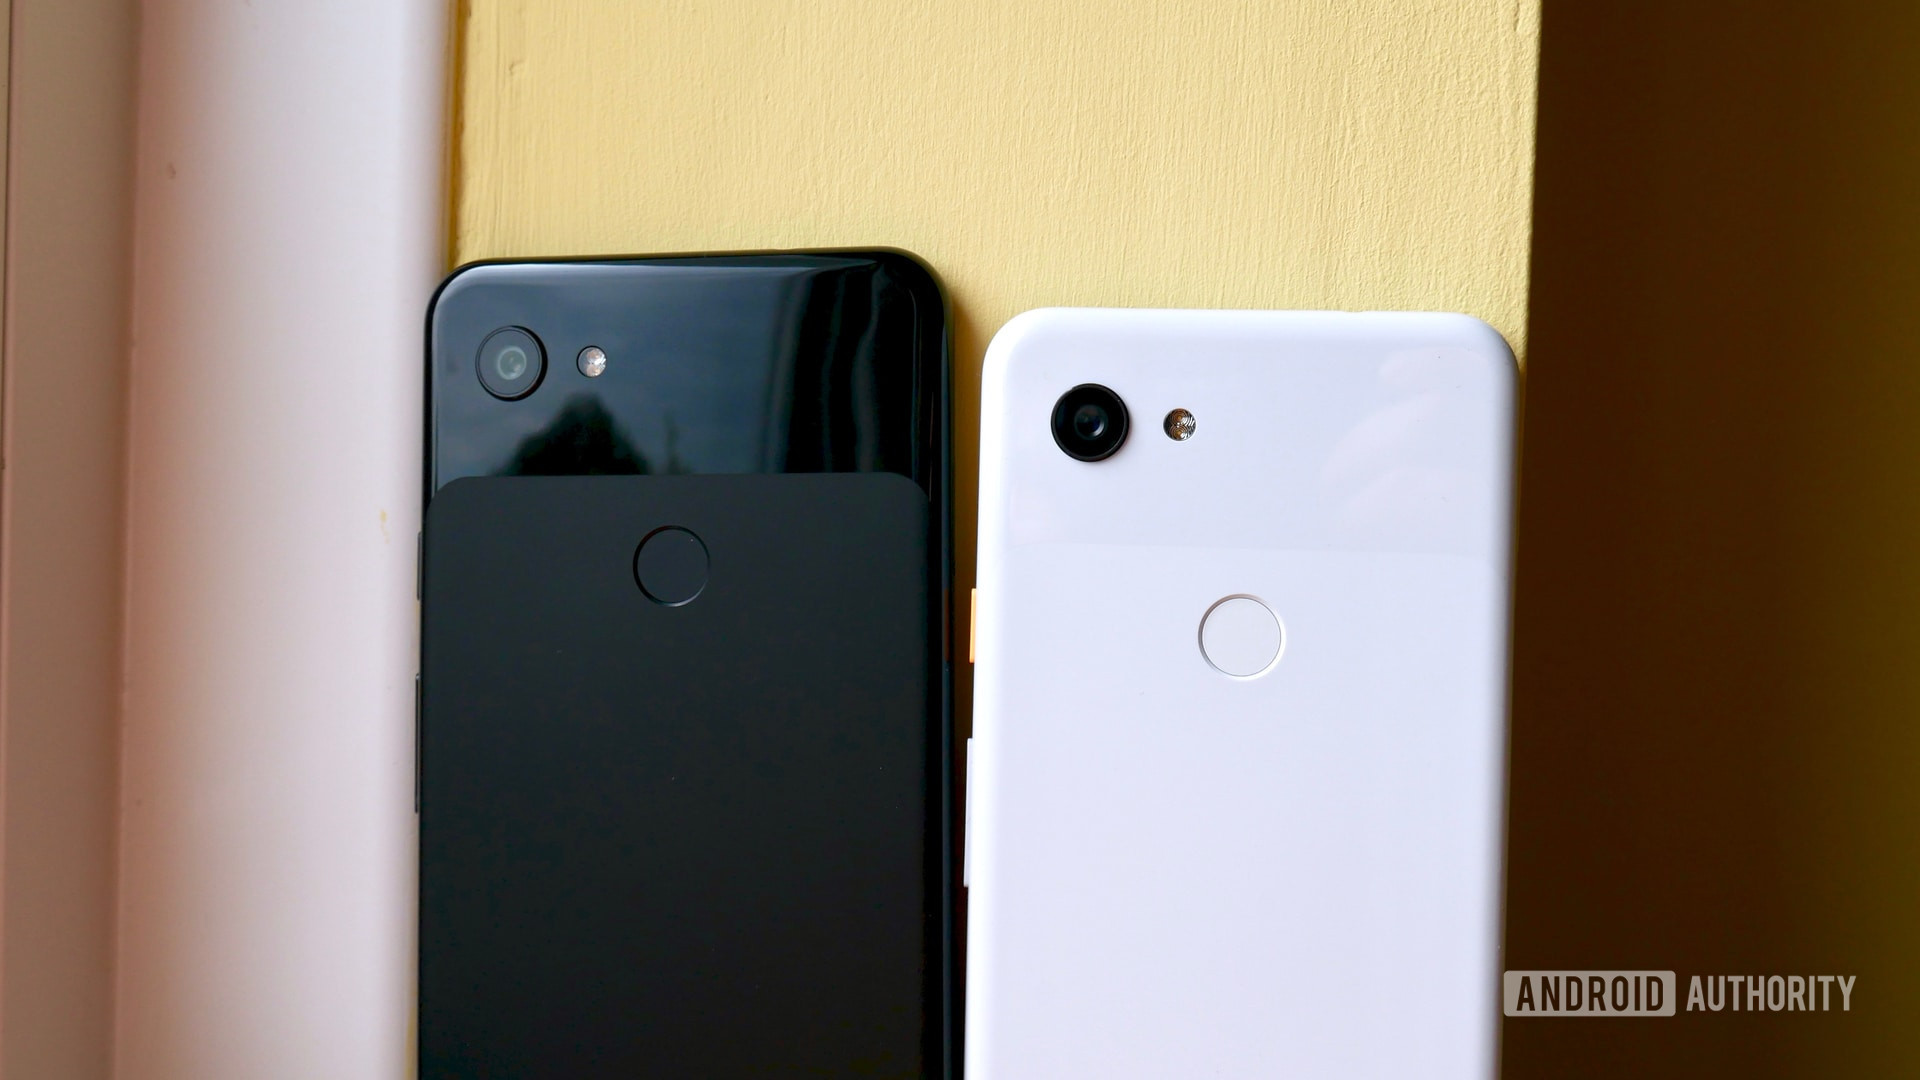 Google Pixel 3a and Pixel 3a XL on the back